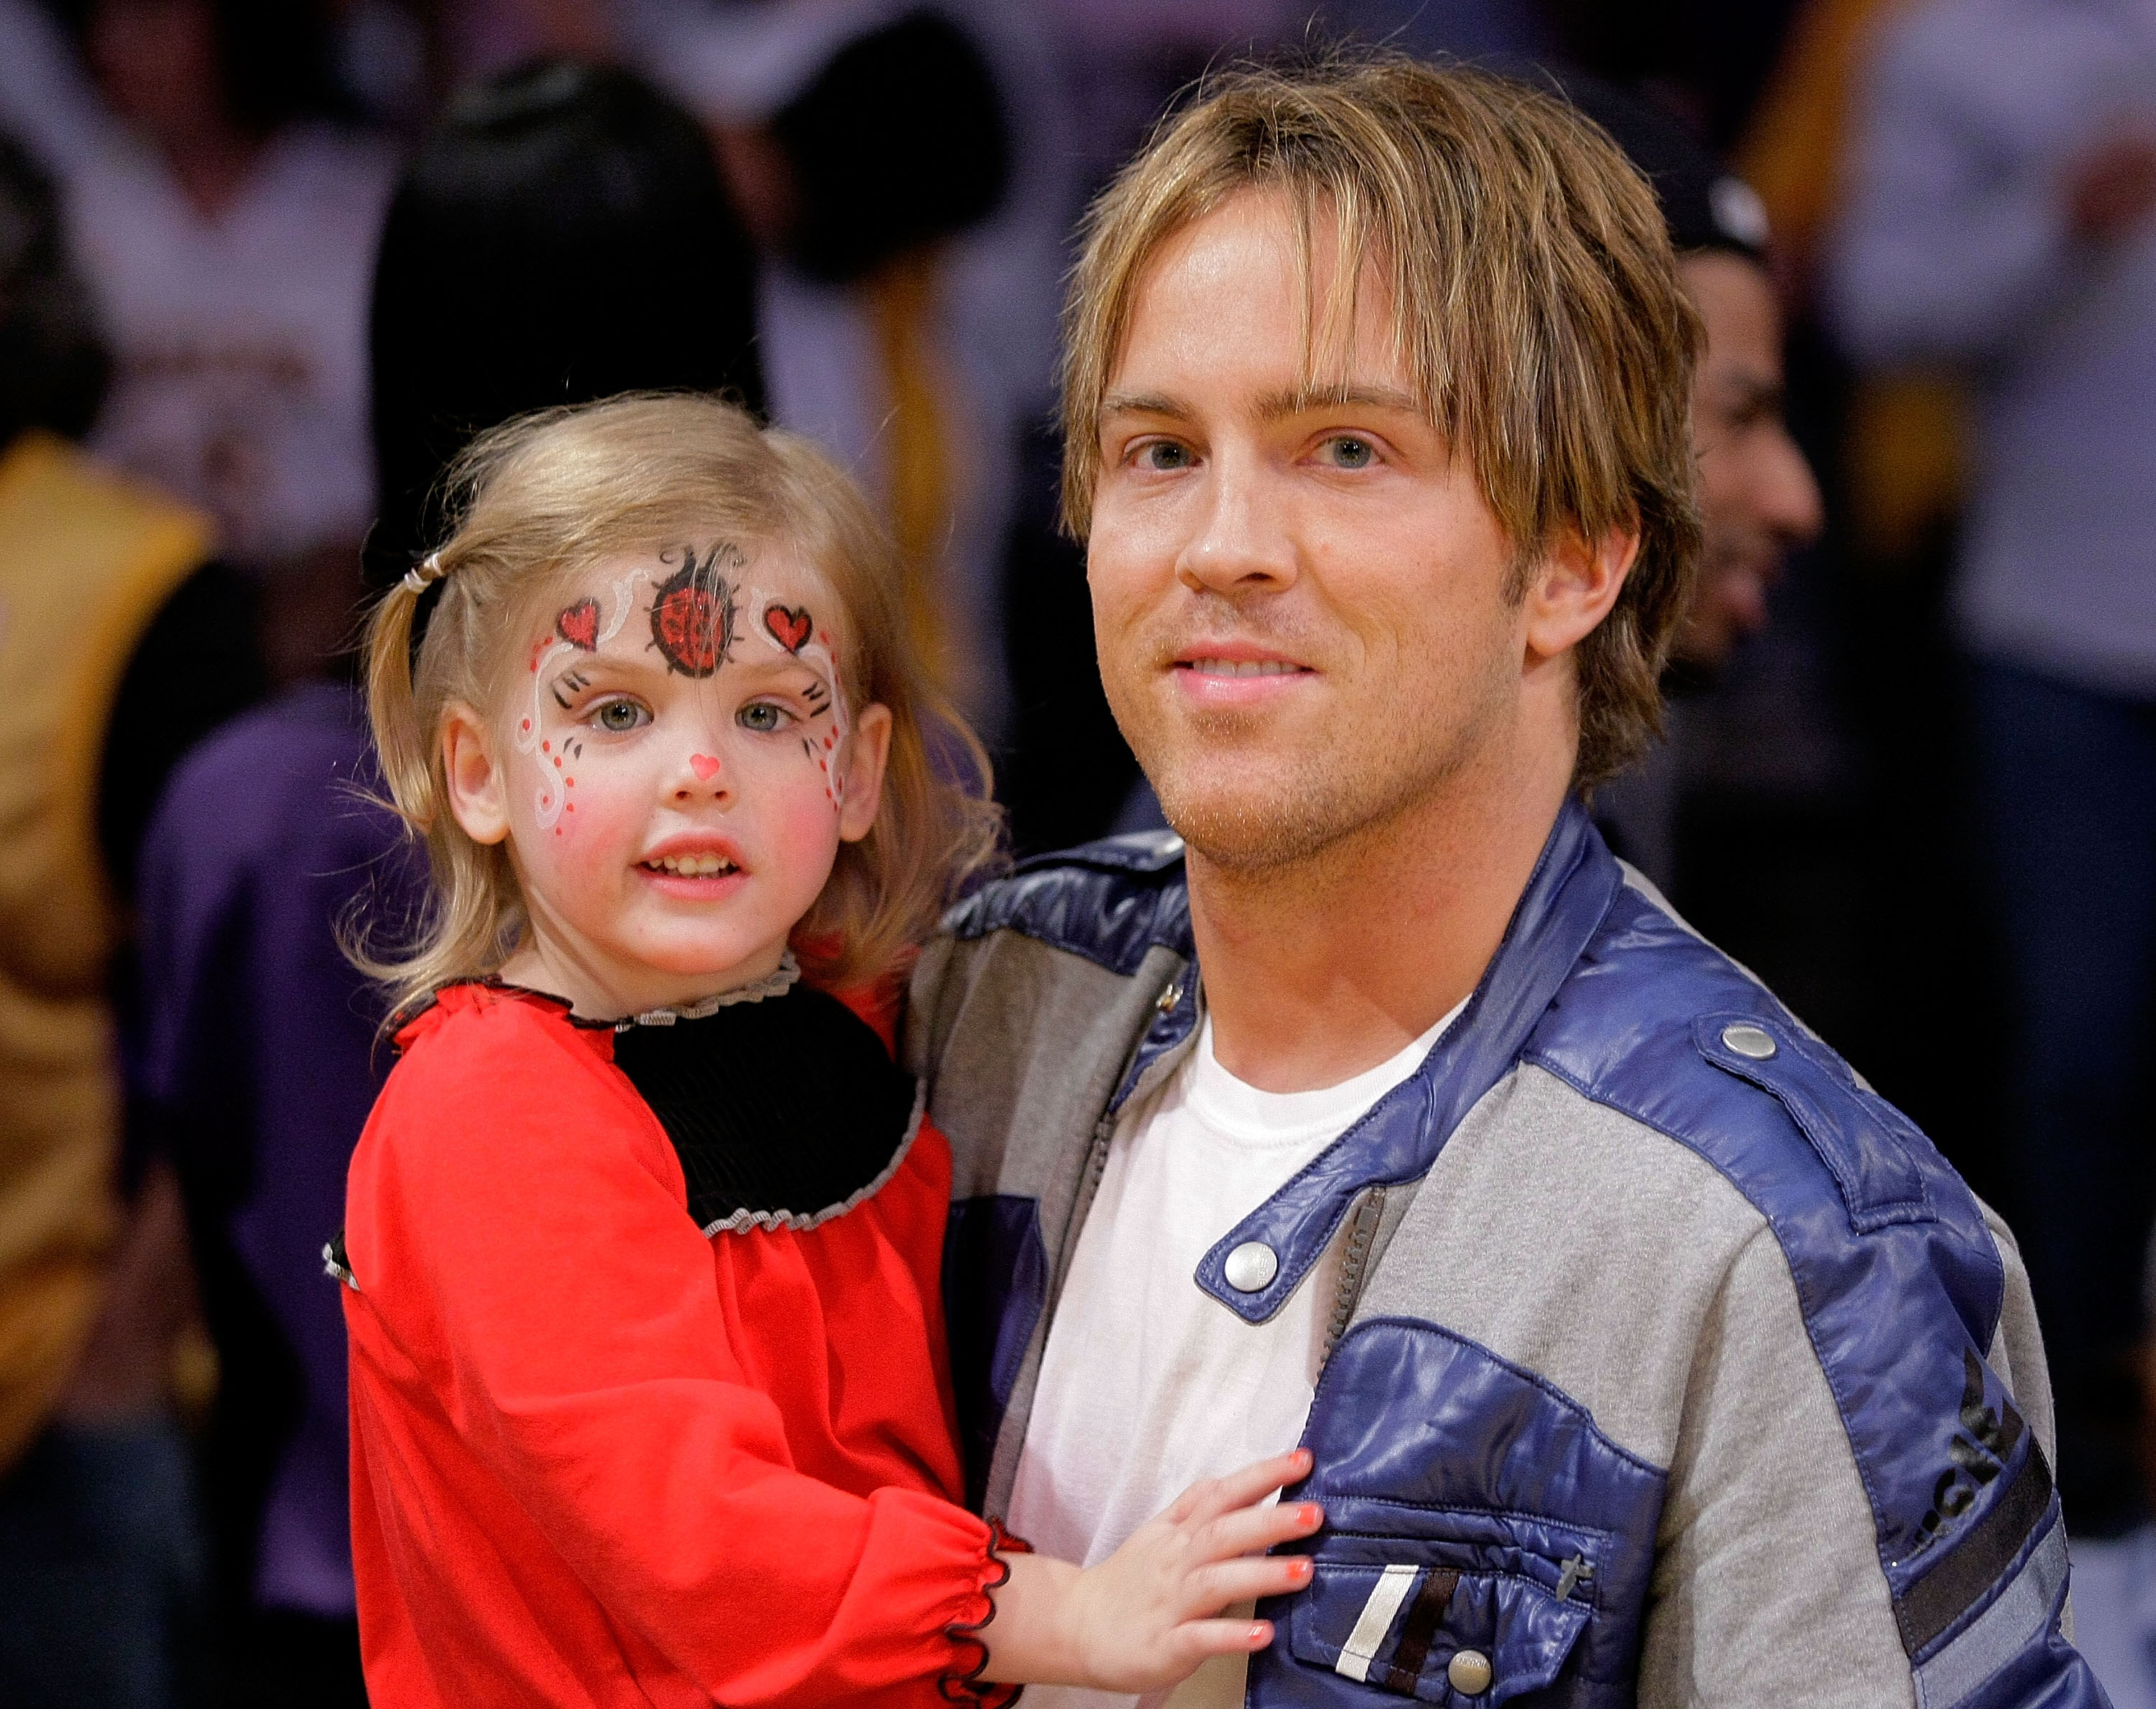 Larry Birkhead and daughter Dannielynn at the New Orleans Hornets and the Los Angeles Lakers game on November 8, 2009 | Source: Getty Images